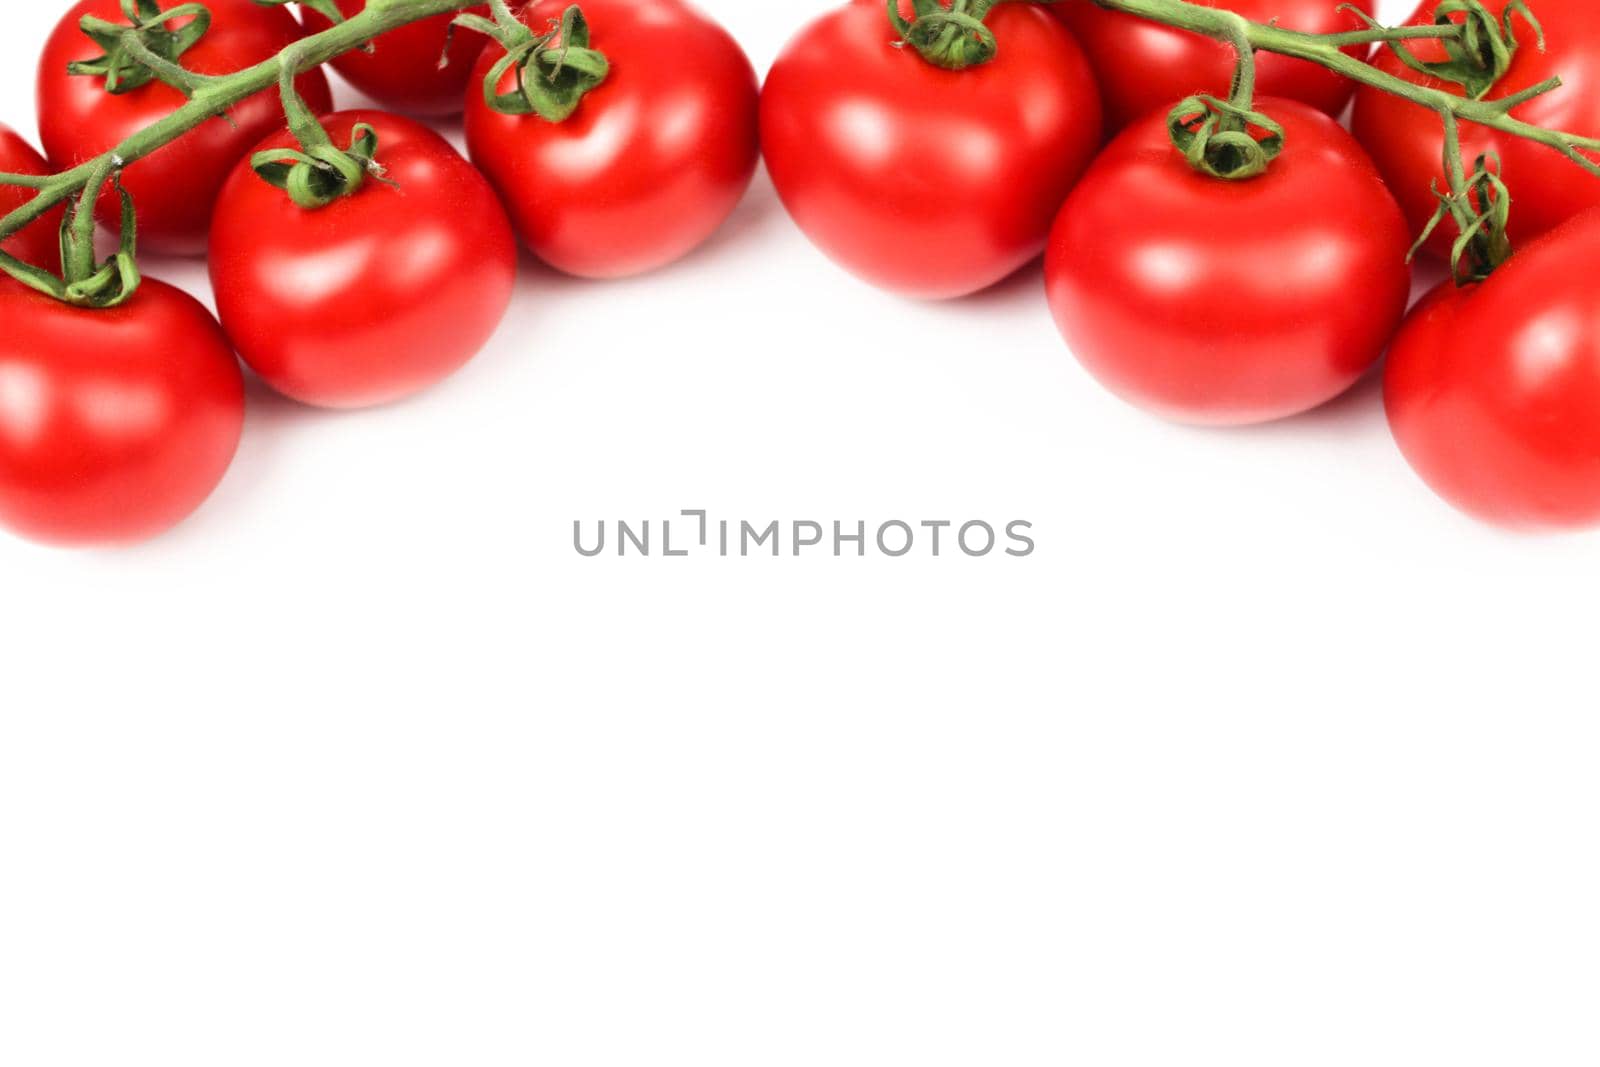 Red tomatoes on white background by JuliaDorian